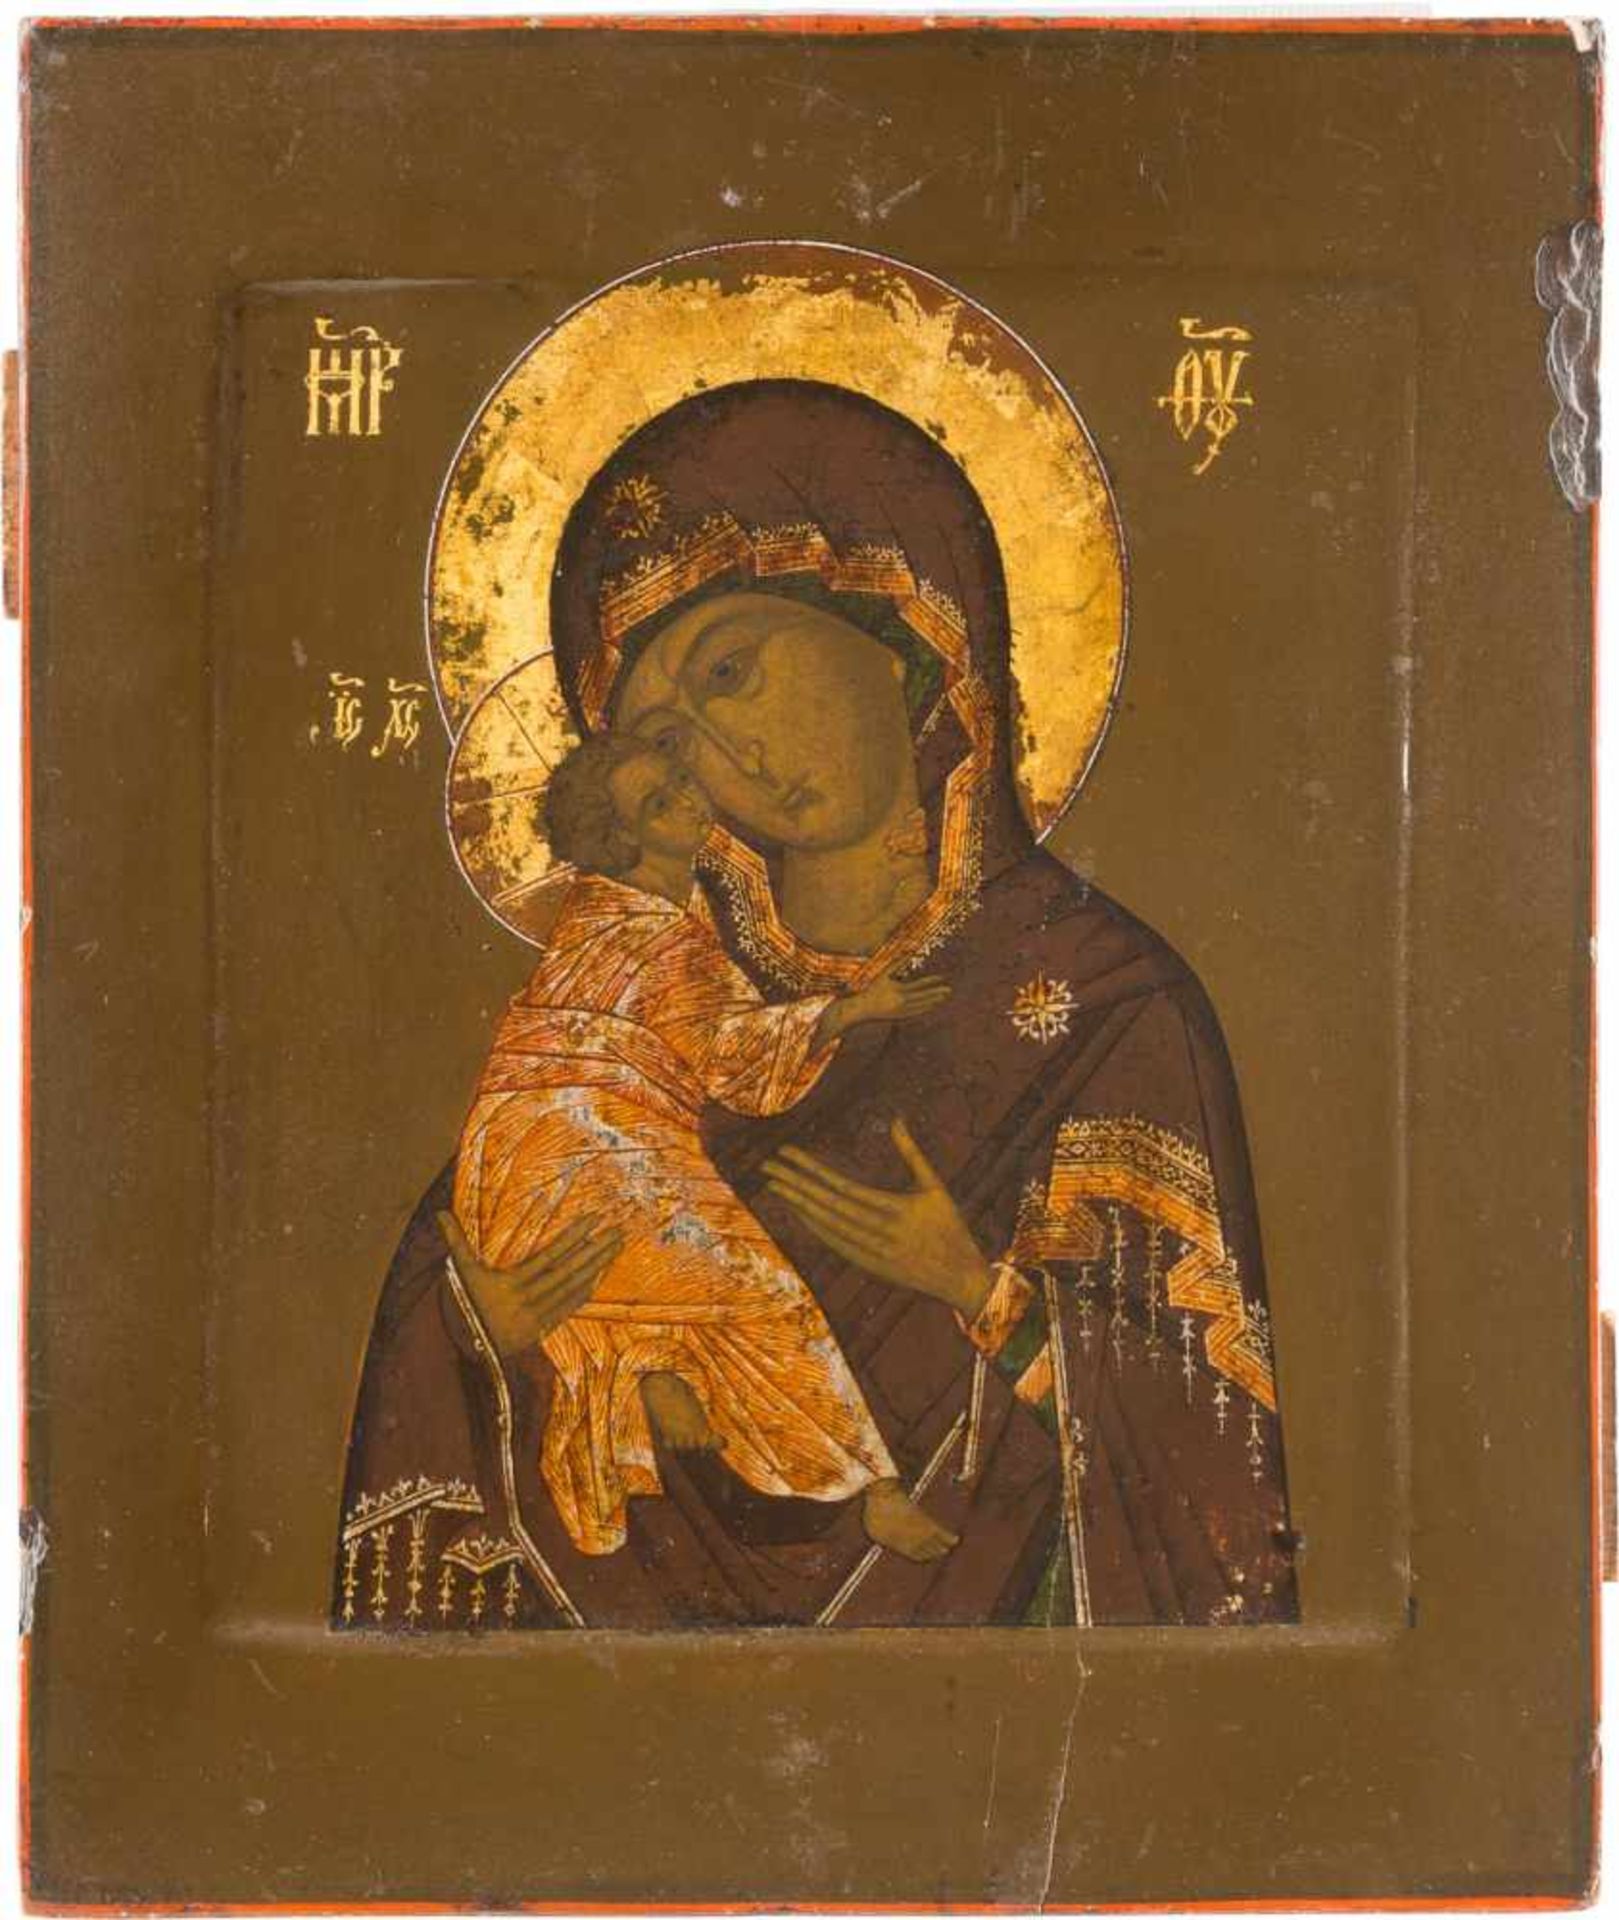 A FINELY PAINTED ICON SHOWING THE VLADIMIRSKAYA MOTHER OF GOD